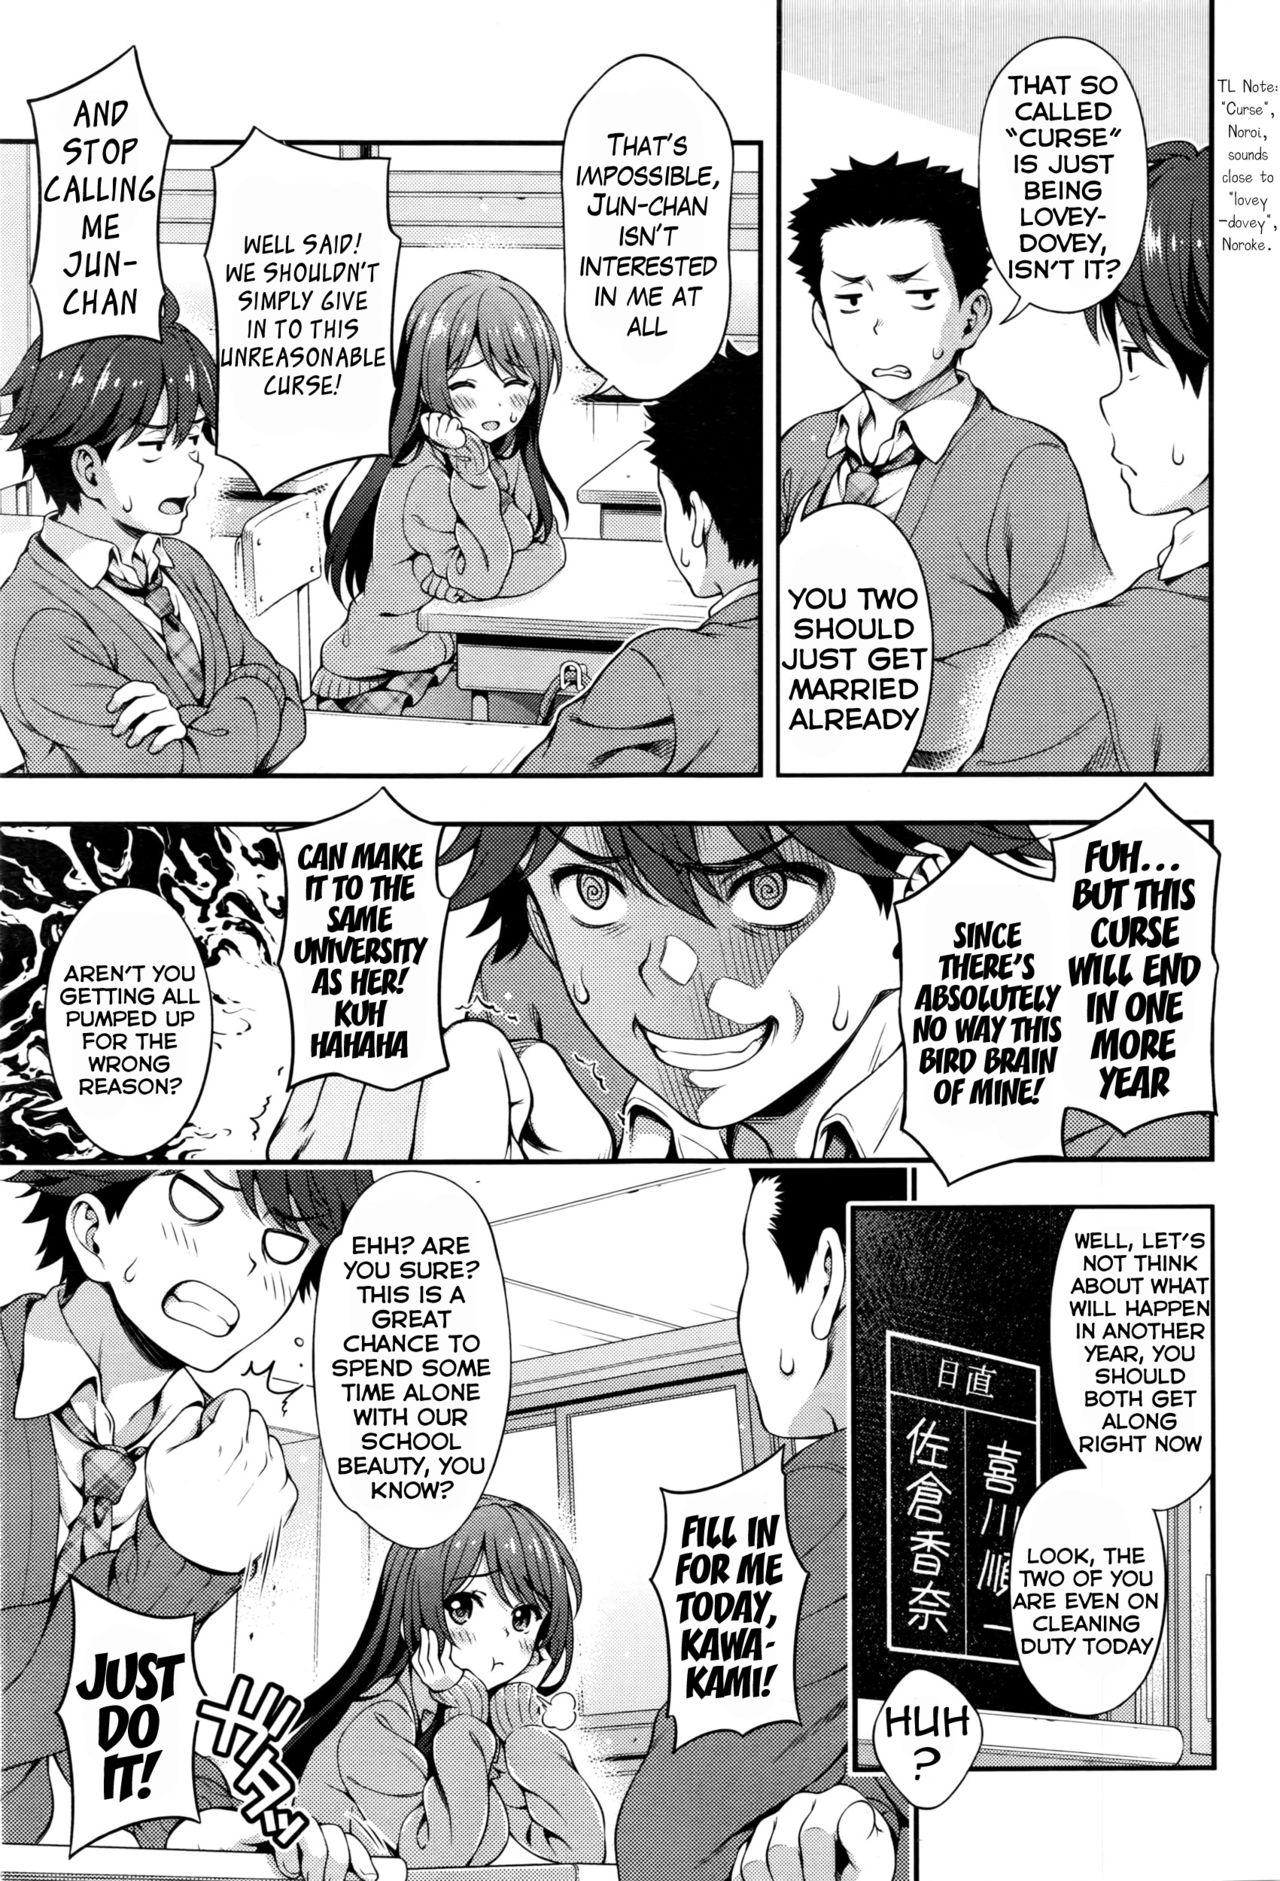 Best Blowjob Akai Ito no Noroi | The Red String's Curse Ex Girlfriend - Page 5